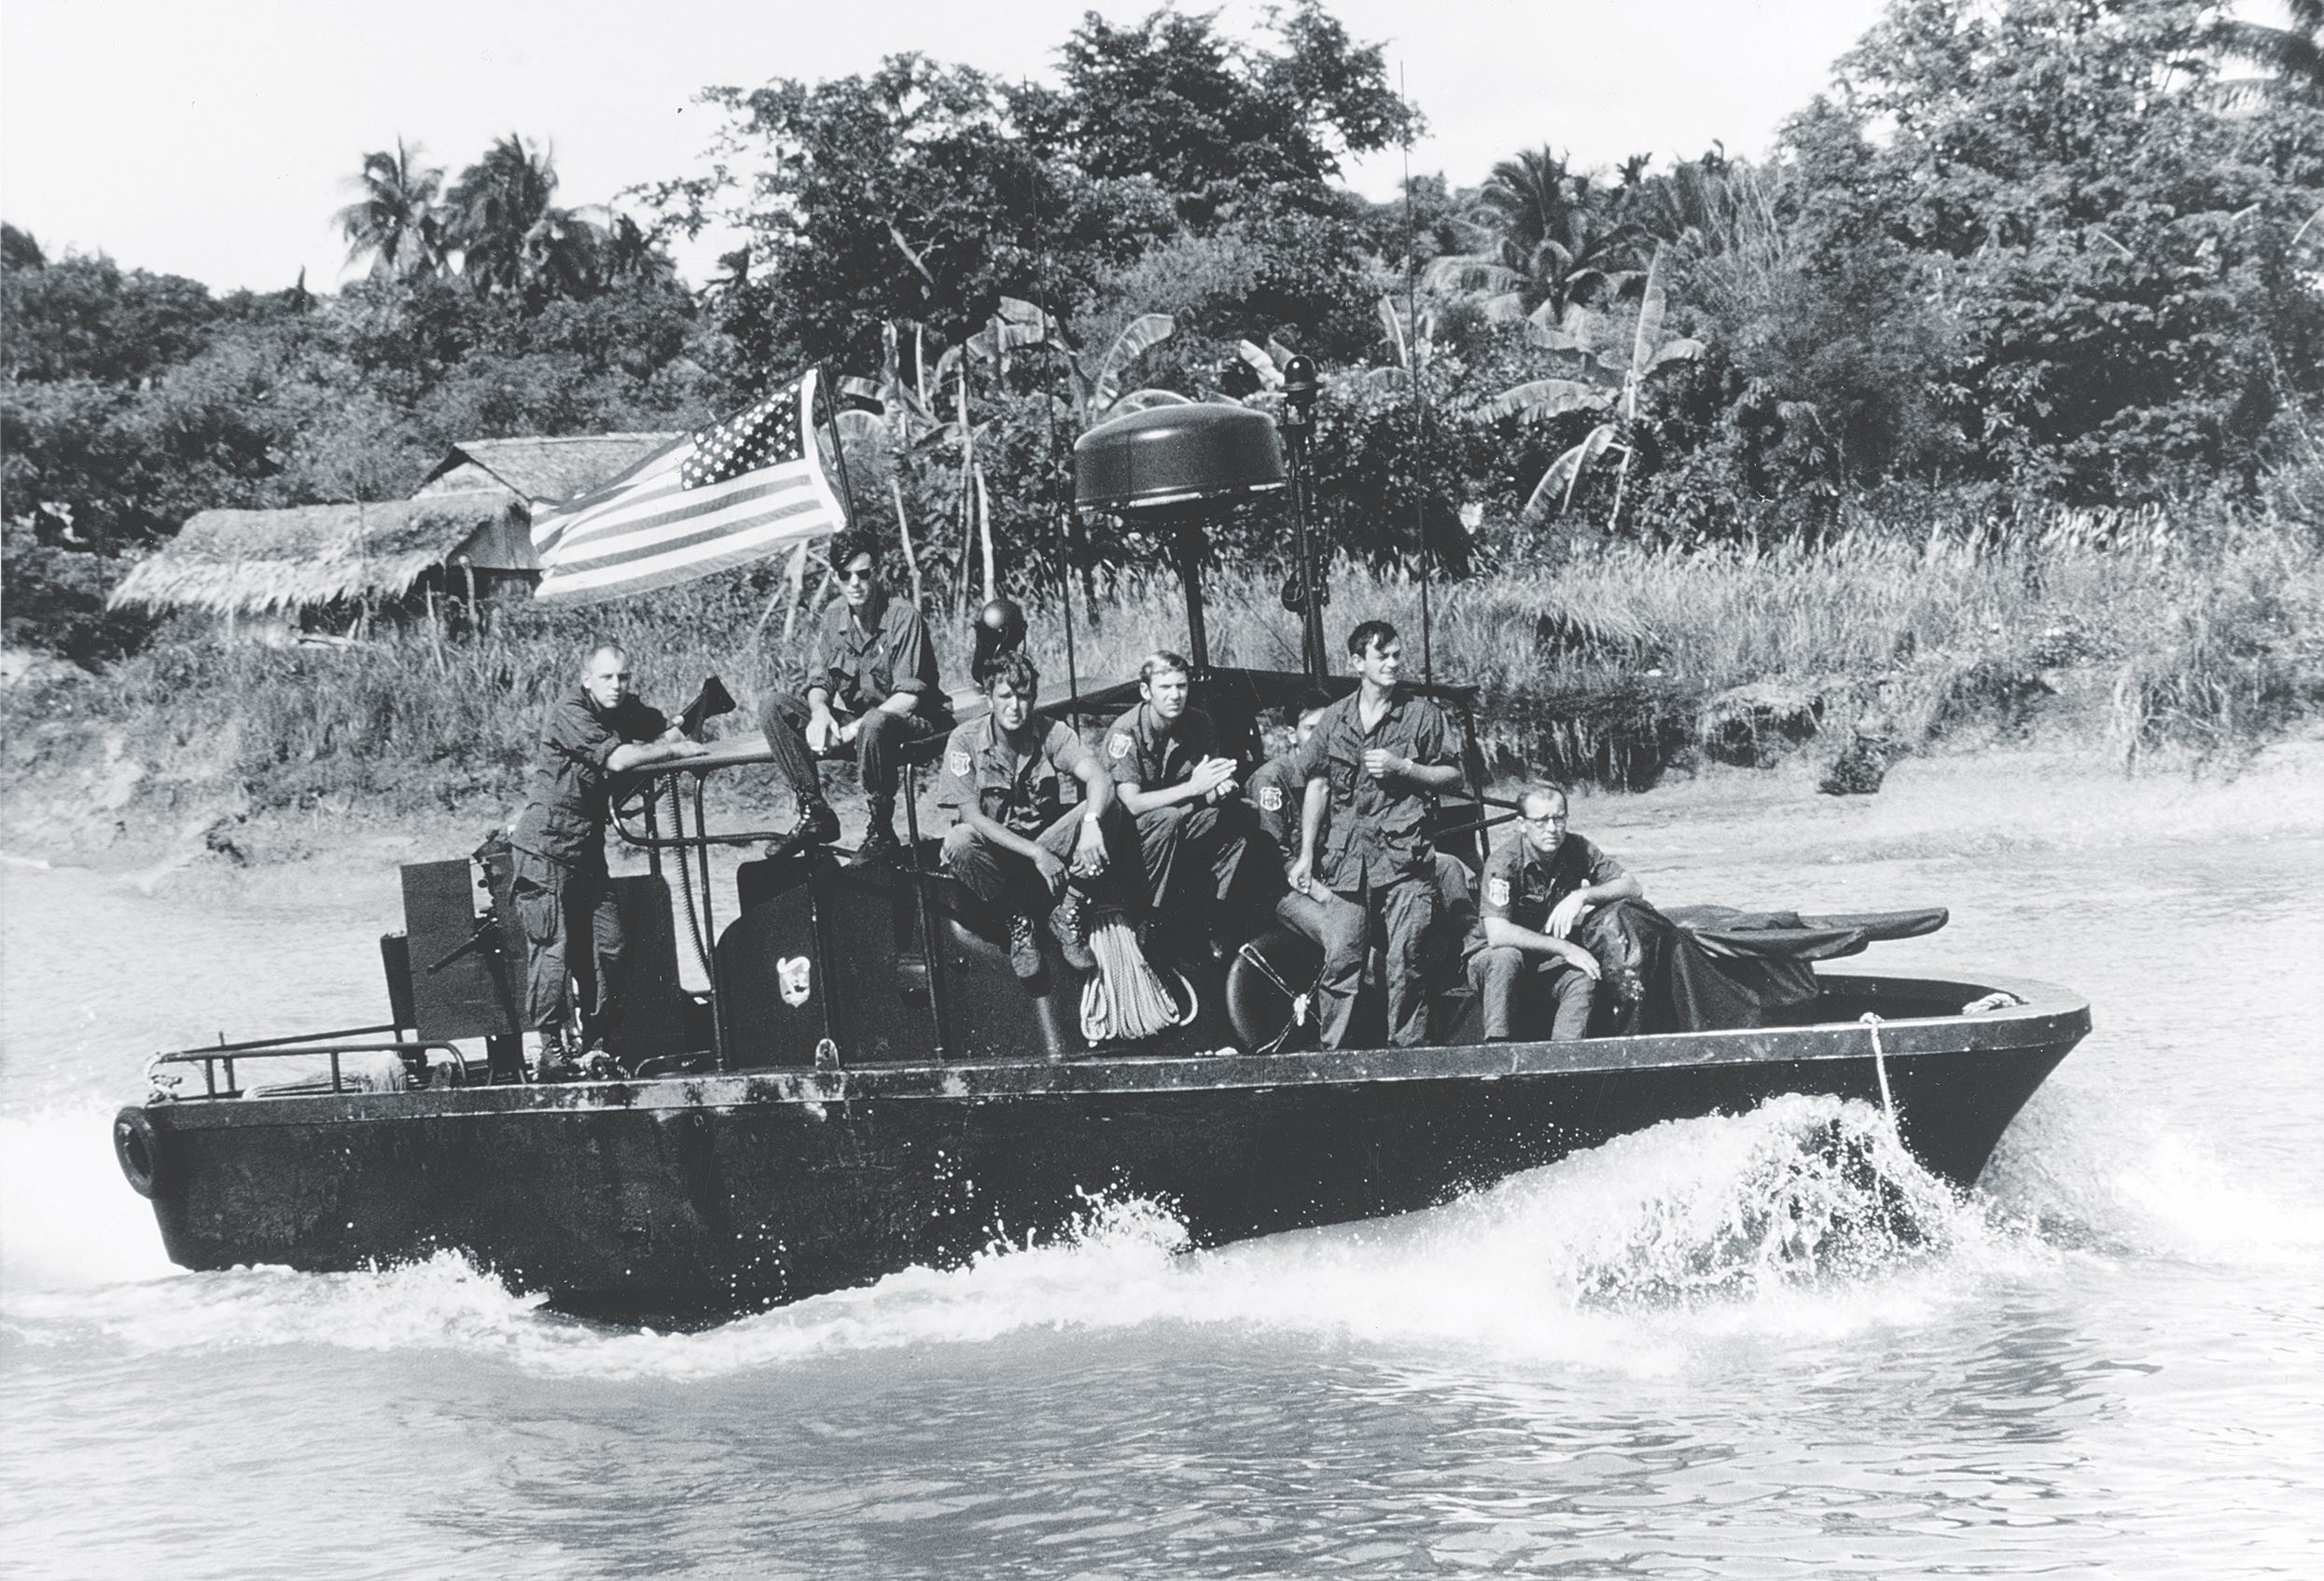 The crewmen of a PBR appear relaxed during a patrol run along the My Tho River in June 1969. / Naval History & Heritage Command